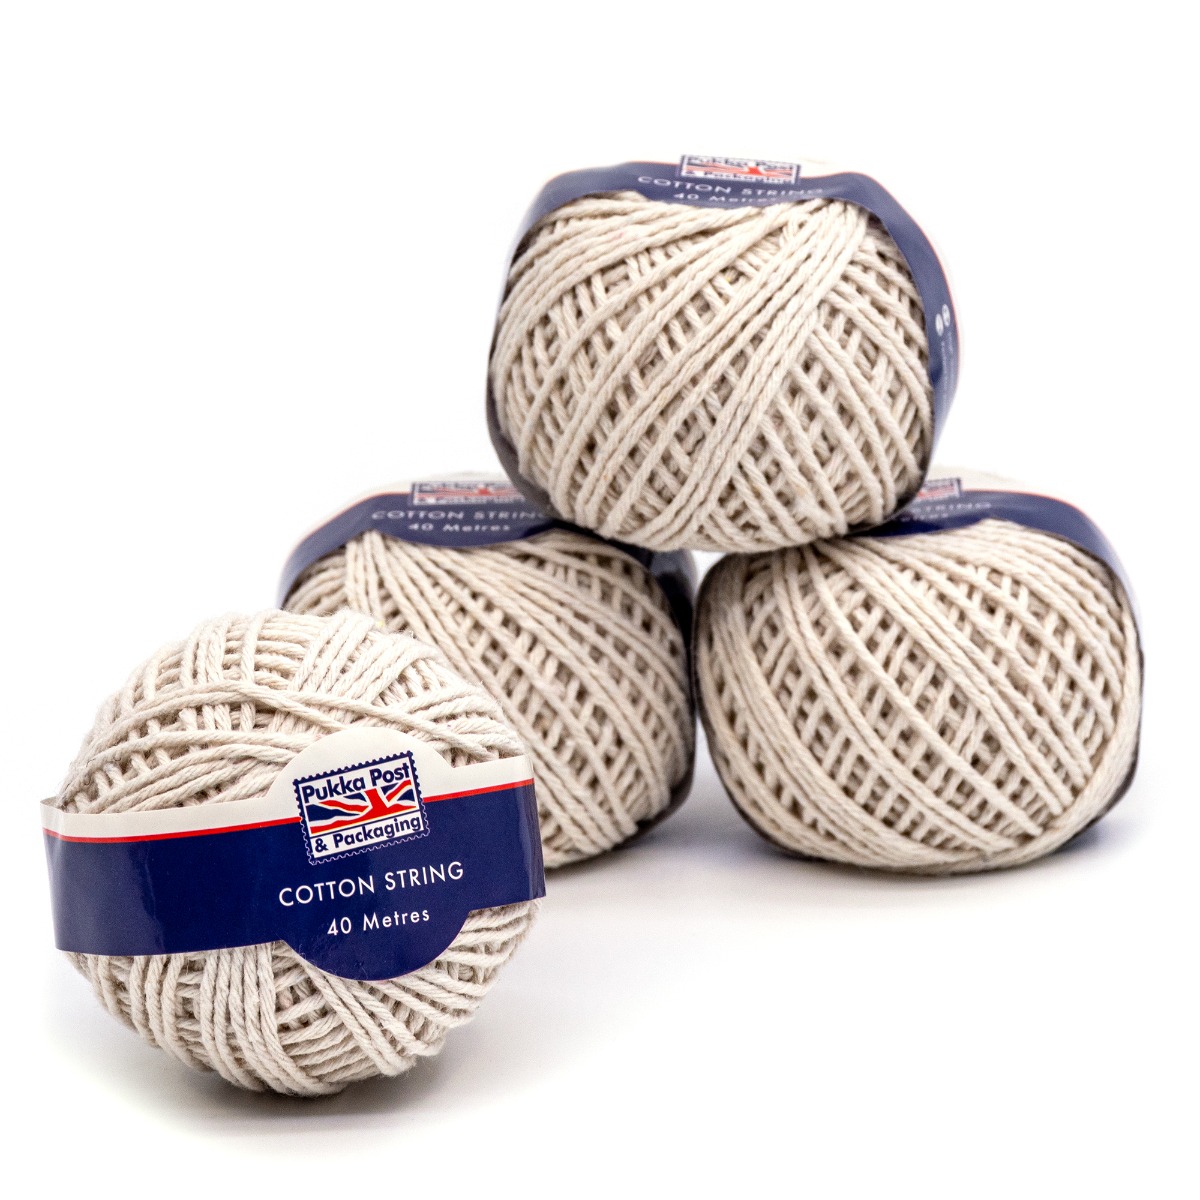 100% cotton String Ball in 40m length - Pack of 4 - Pukka Post